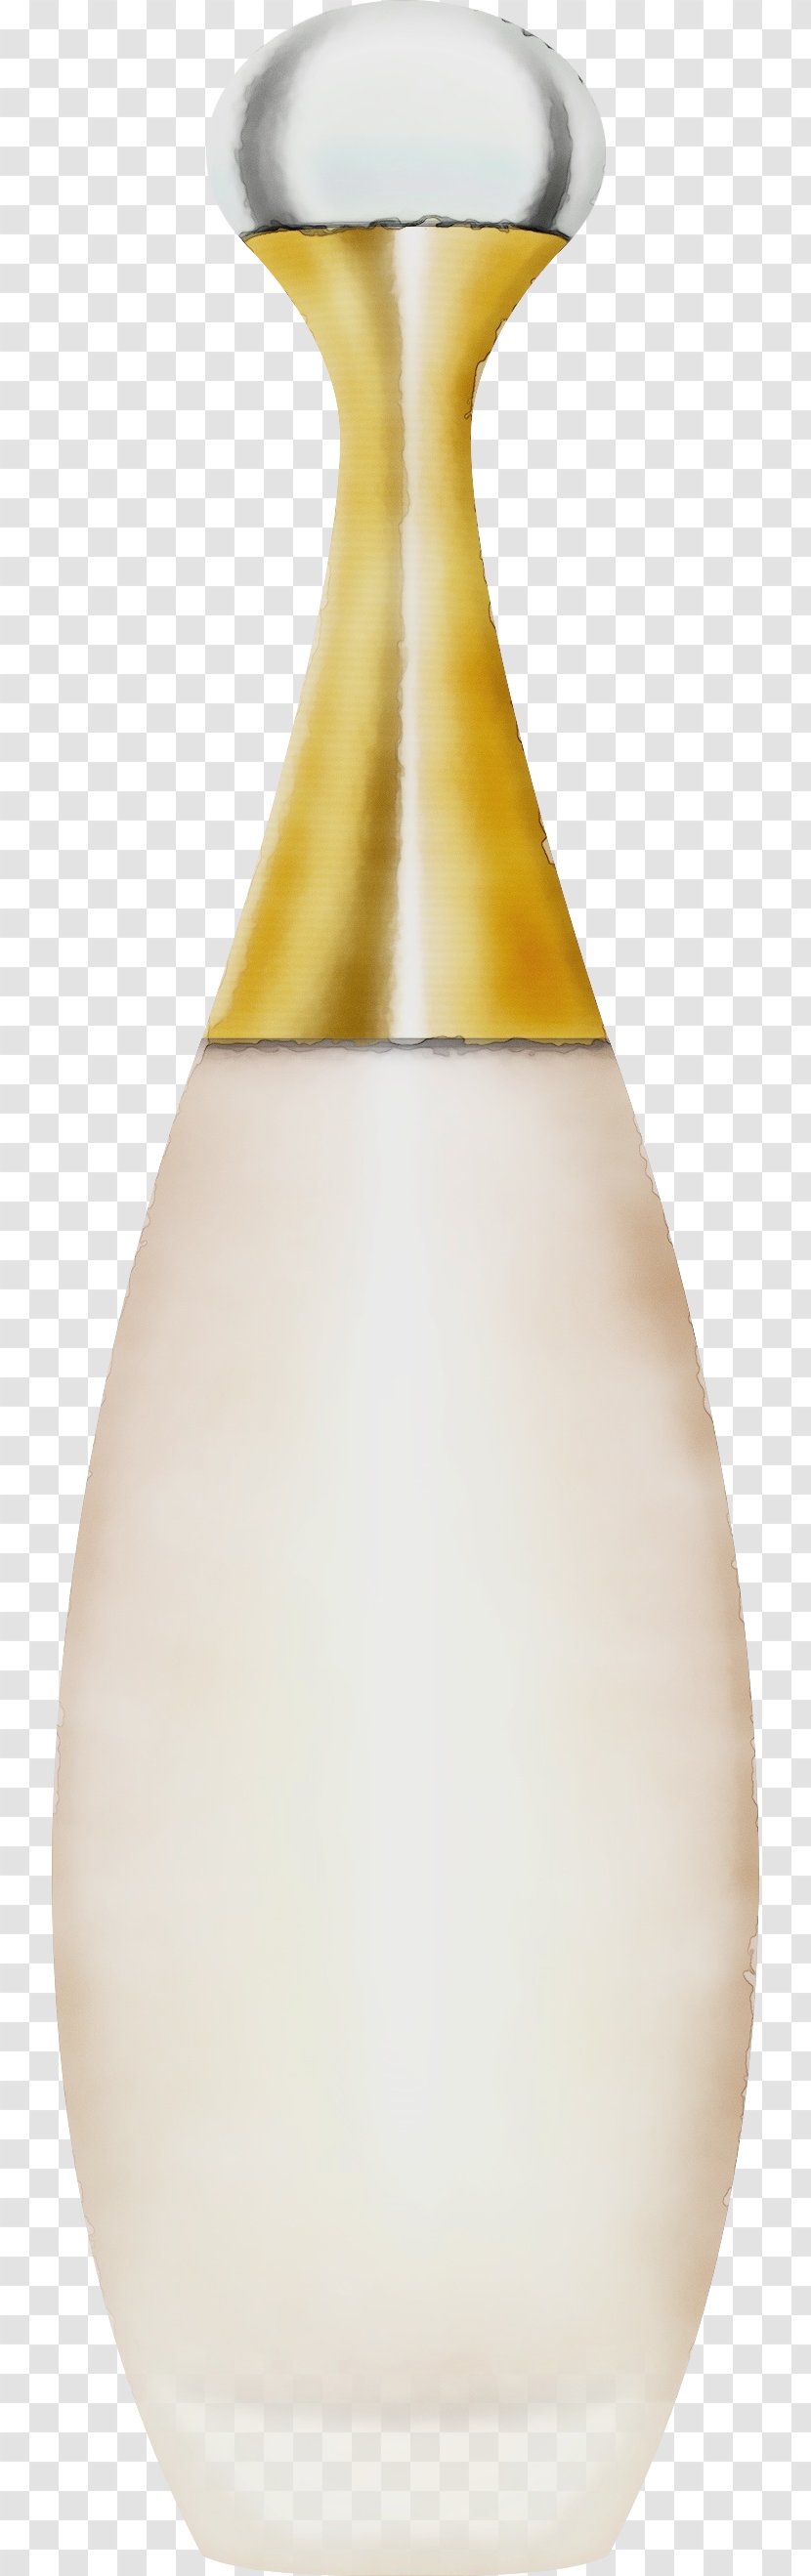 Champagne - Cone Transparent PNG